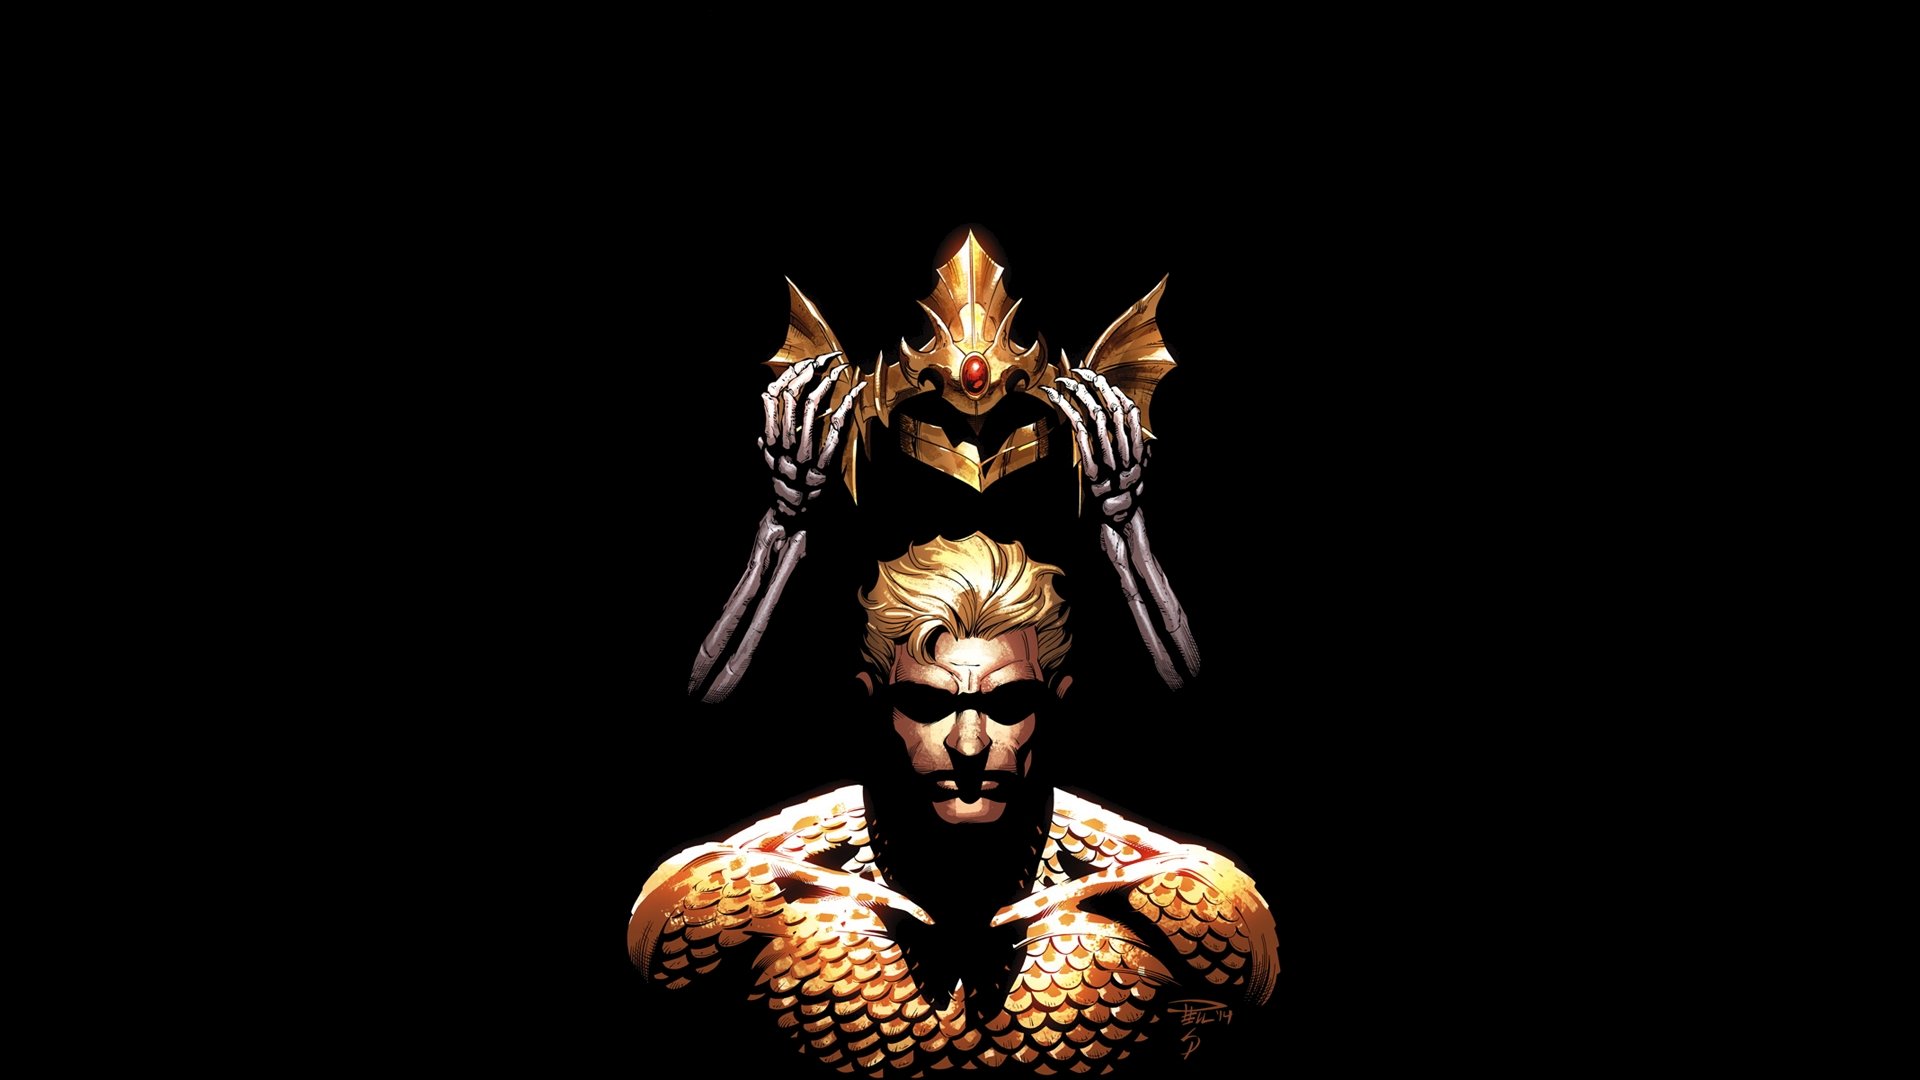 Download full hd 1920x1080 Aquaman computer background ID:89035 for free